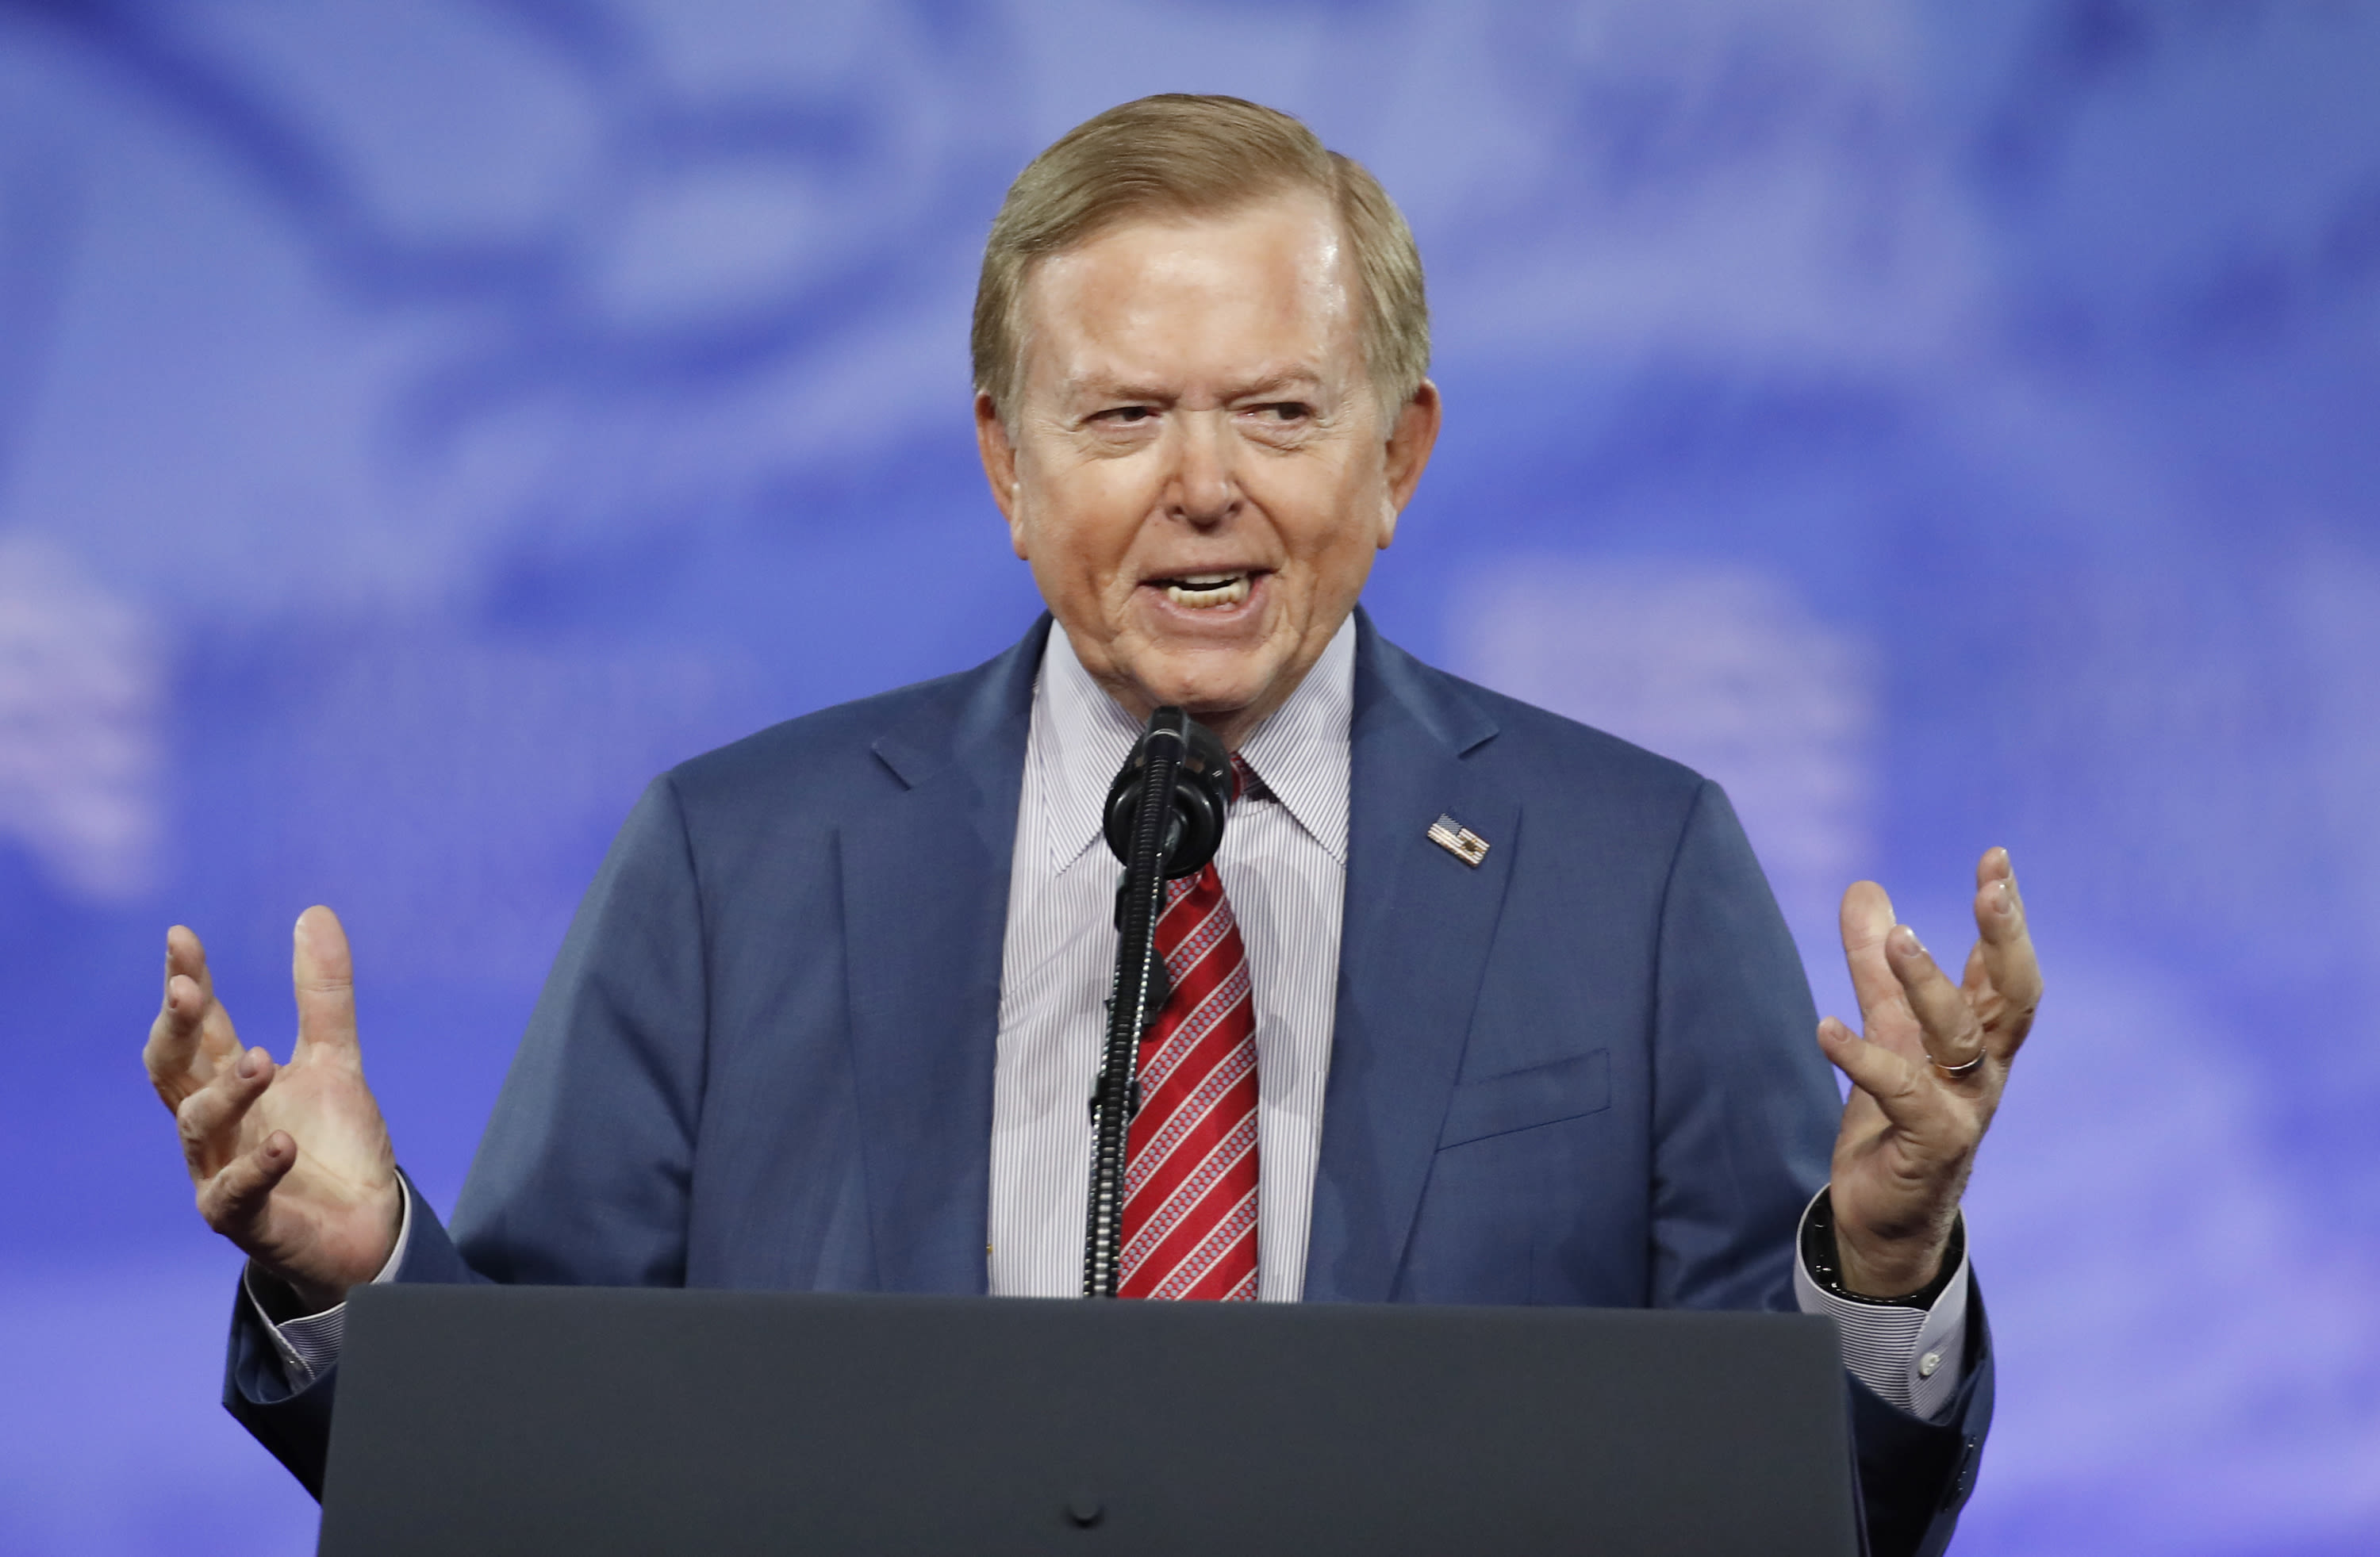 Lou Dobbs, veteran TV news host and conservative commentator, dies at 78